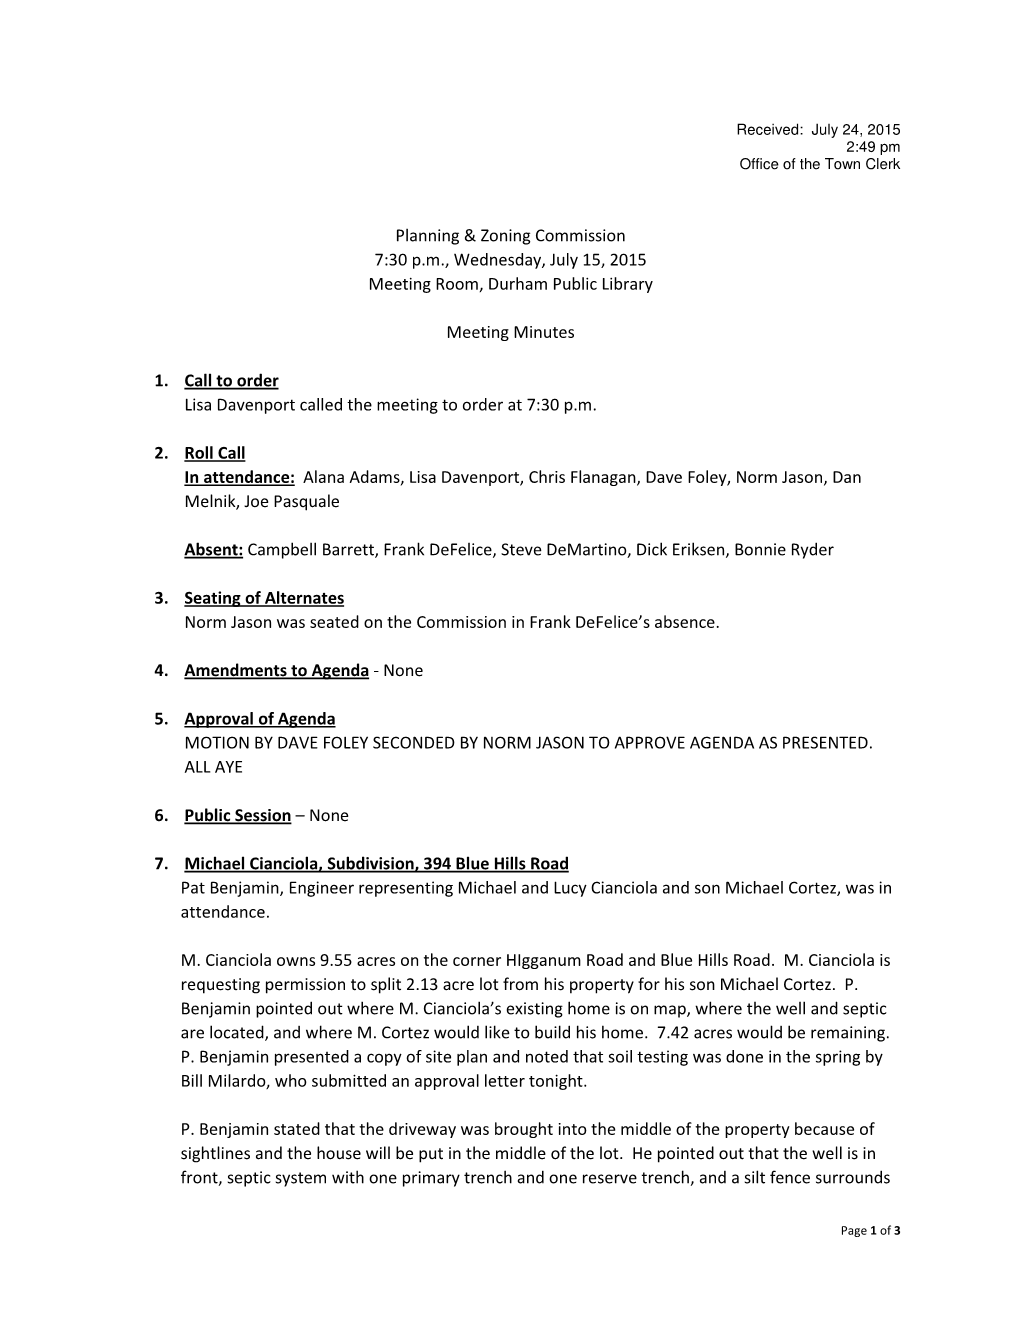 Planning & Zoning Commission 7:30 P.M., Wednesday, July 15, 2015 Meeting Room, Durham Public Library Meeting Minutes 1. Call